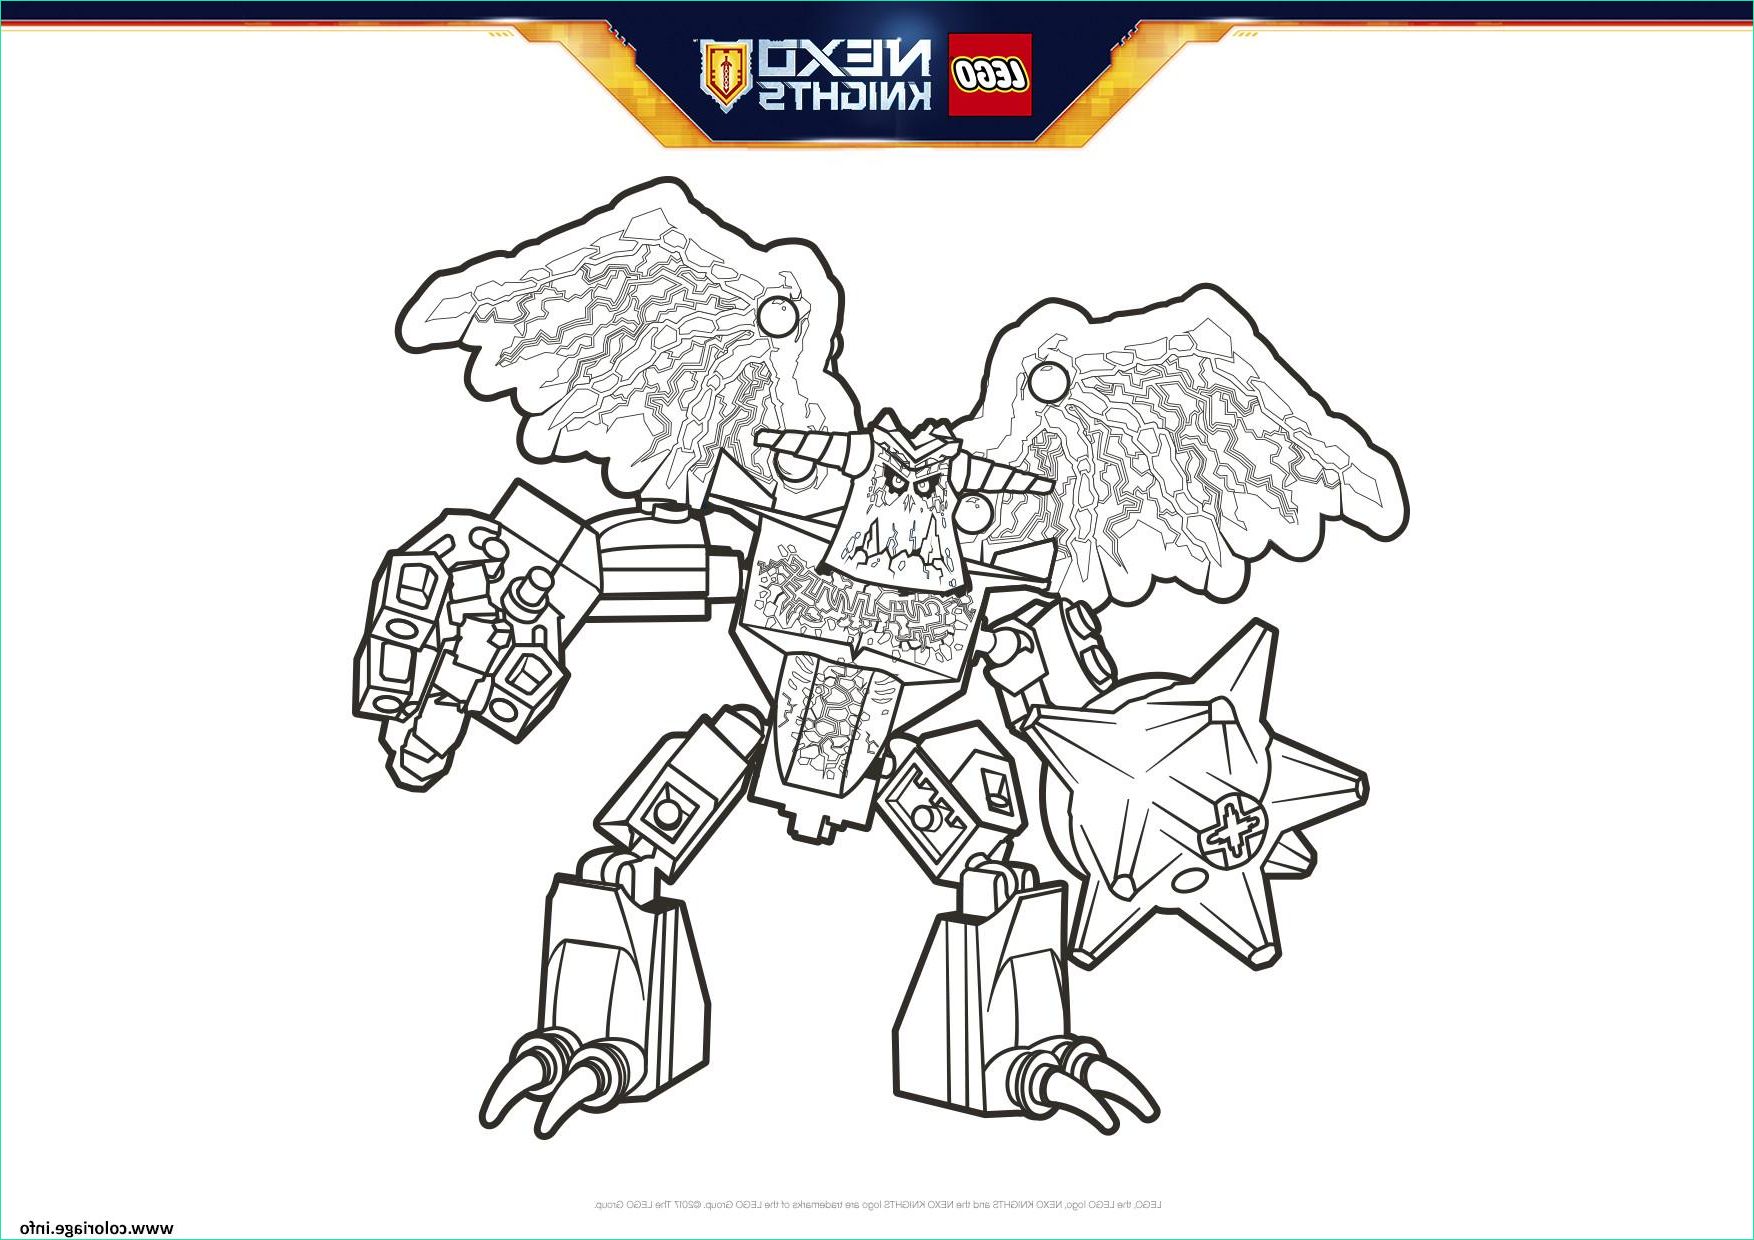 Coloriage Lego Nexo Knights Luxe Image Coloriage Lego Nexo Knights Grimroc Jecolorie